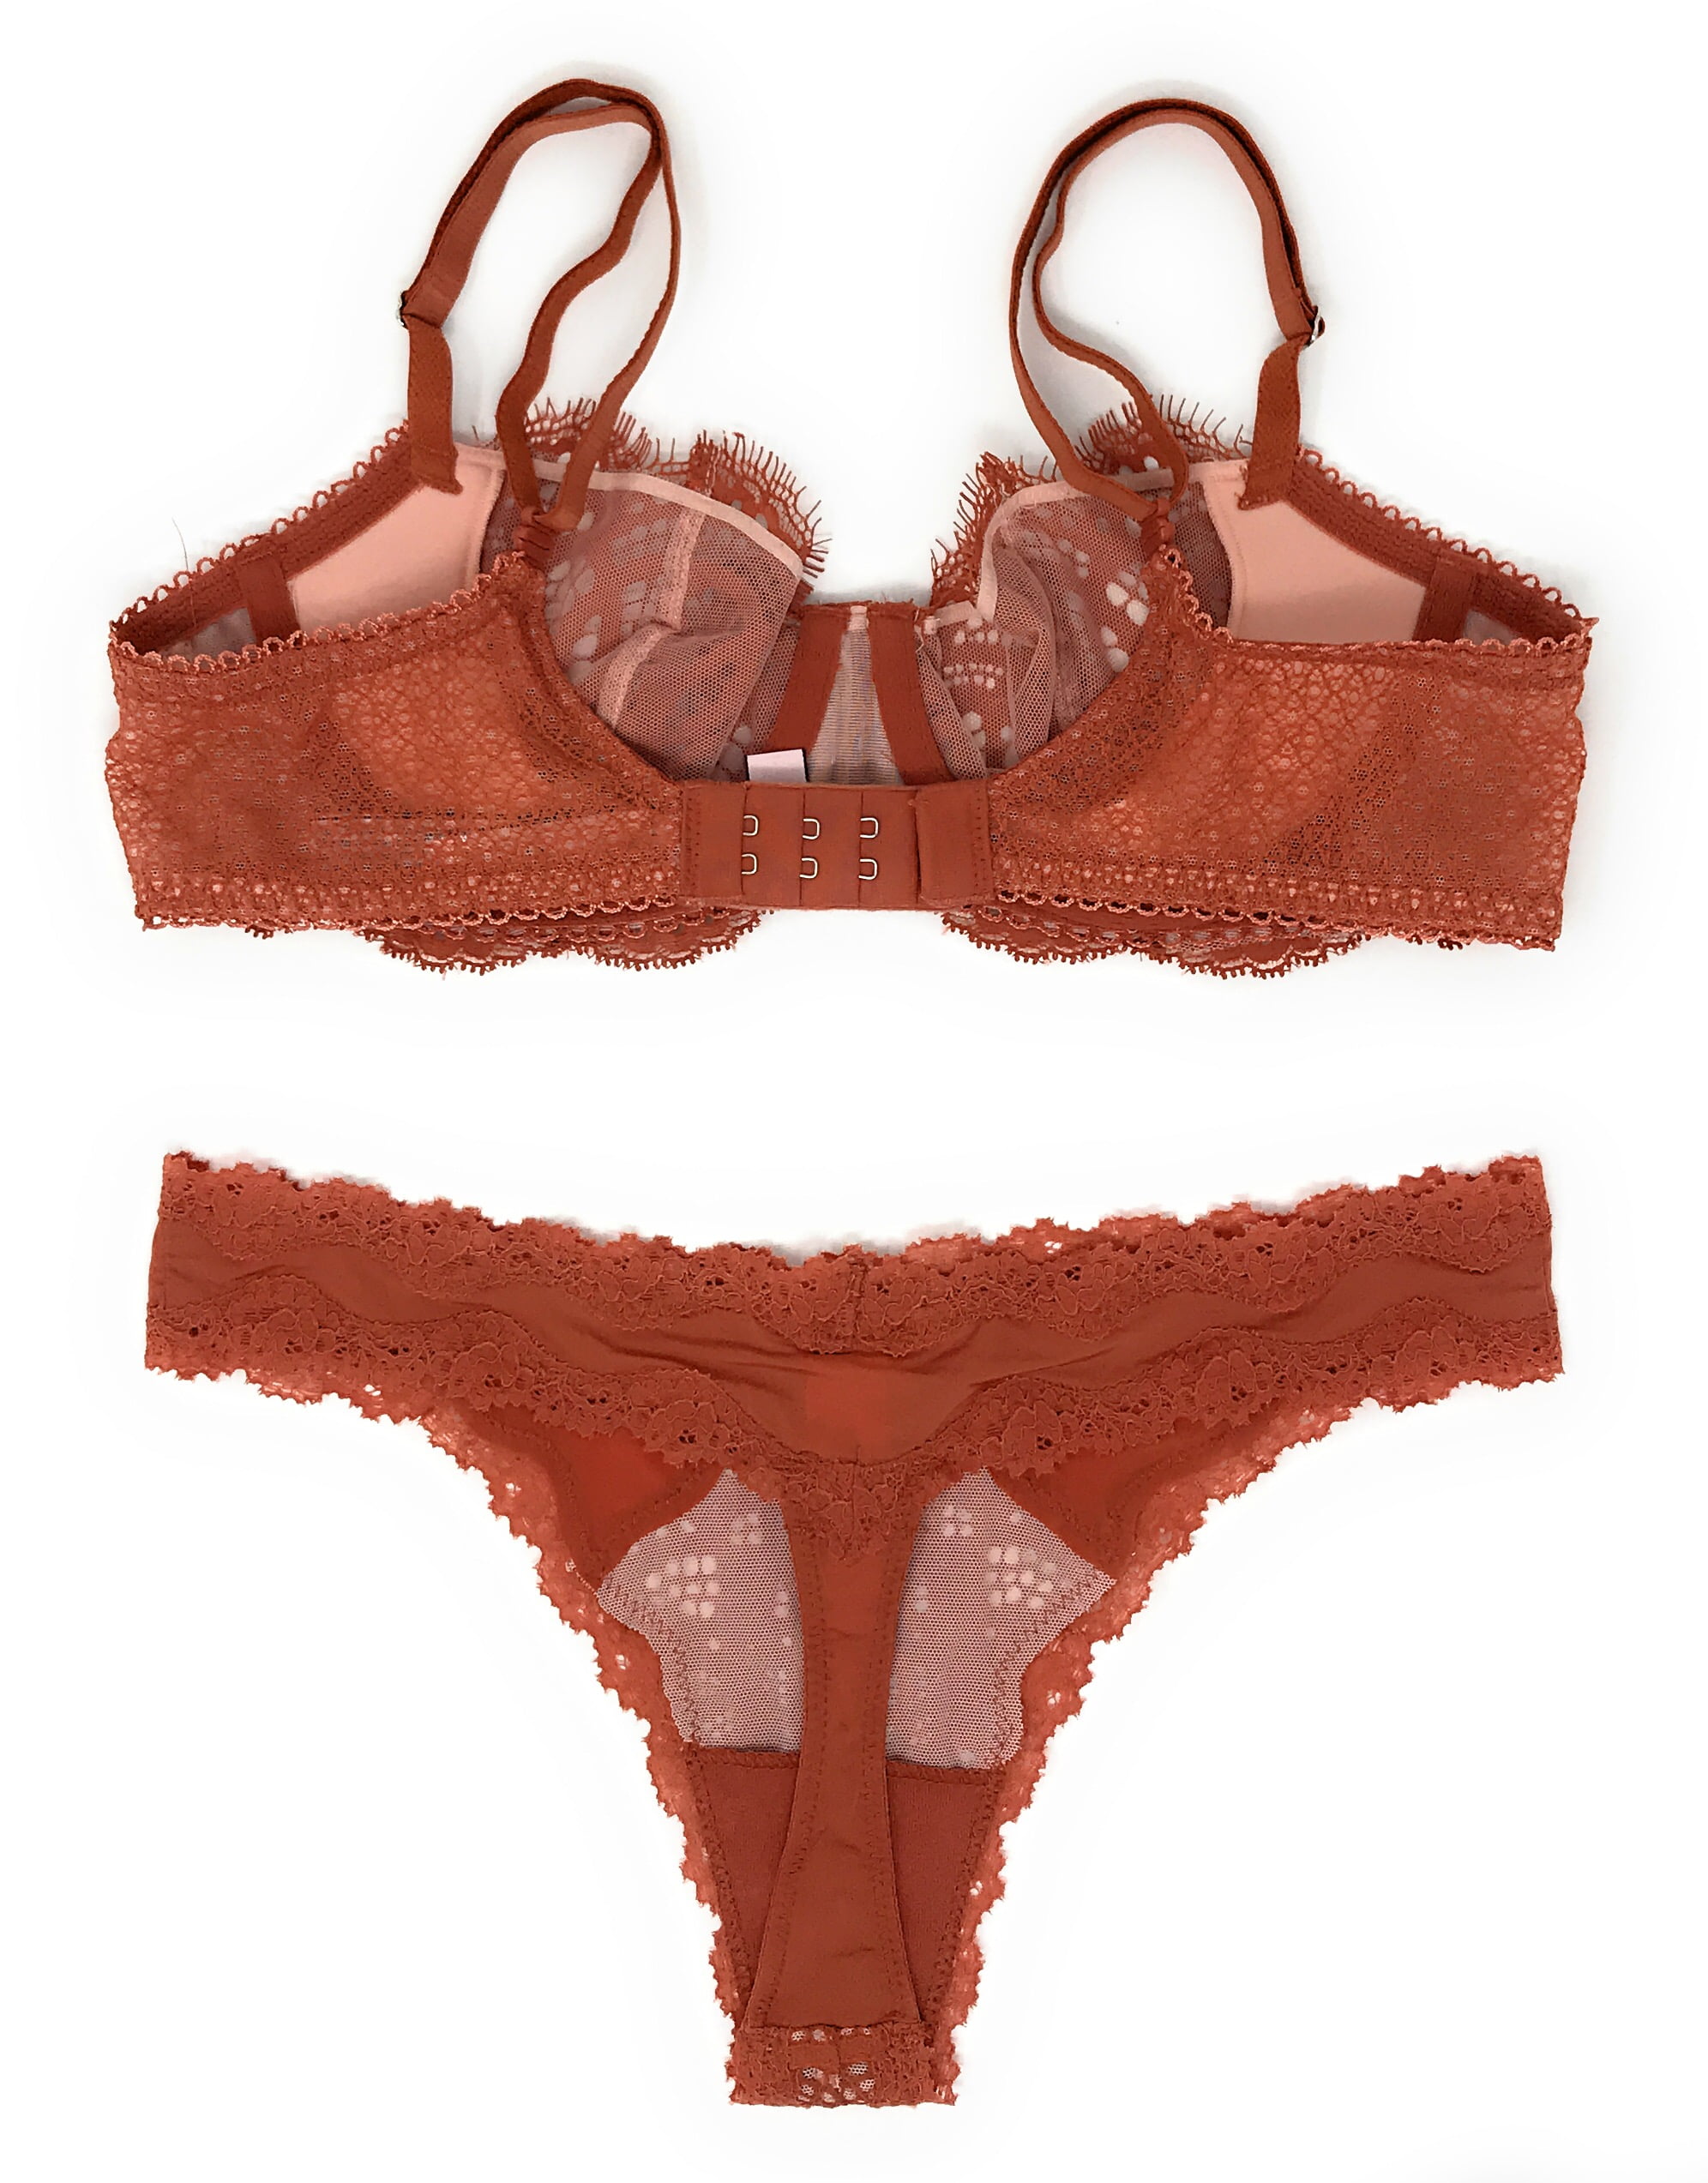 Victoria's Secret Dream Angels Wicked Uplift Bra and Thong Panty